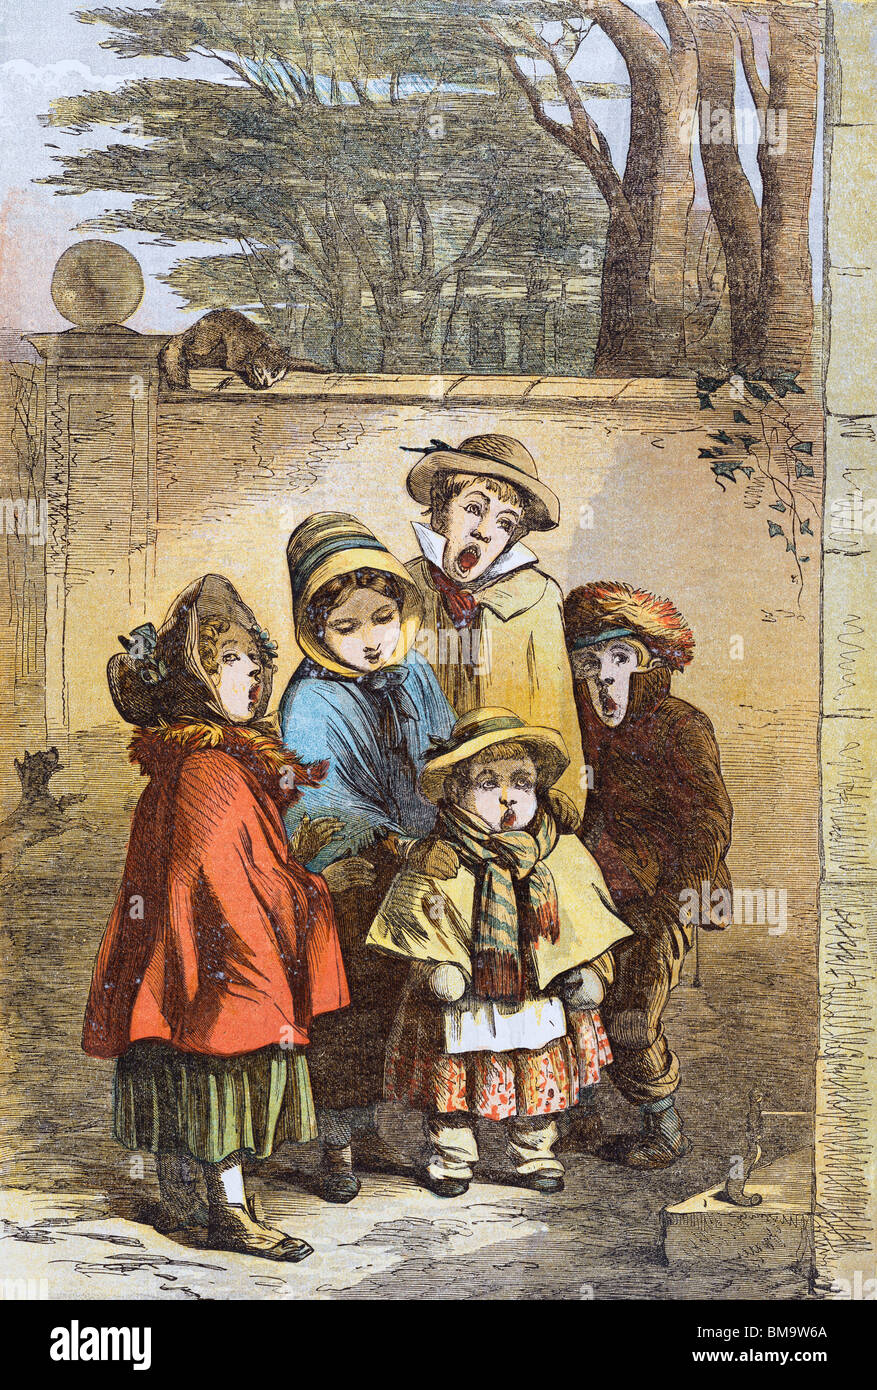 A Christmas Carol, from The Illustrated London News, illustrated by Phiz. London, England, 1855 Stock Photo